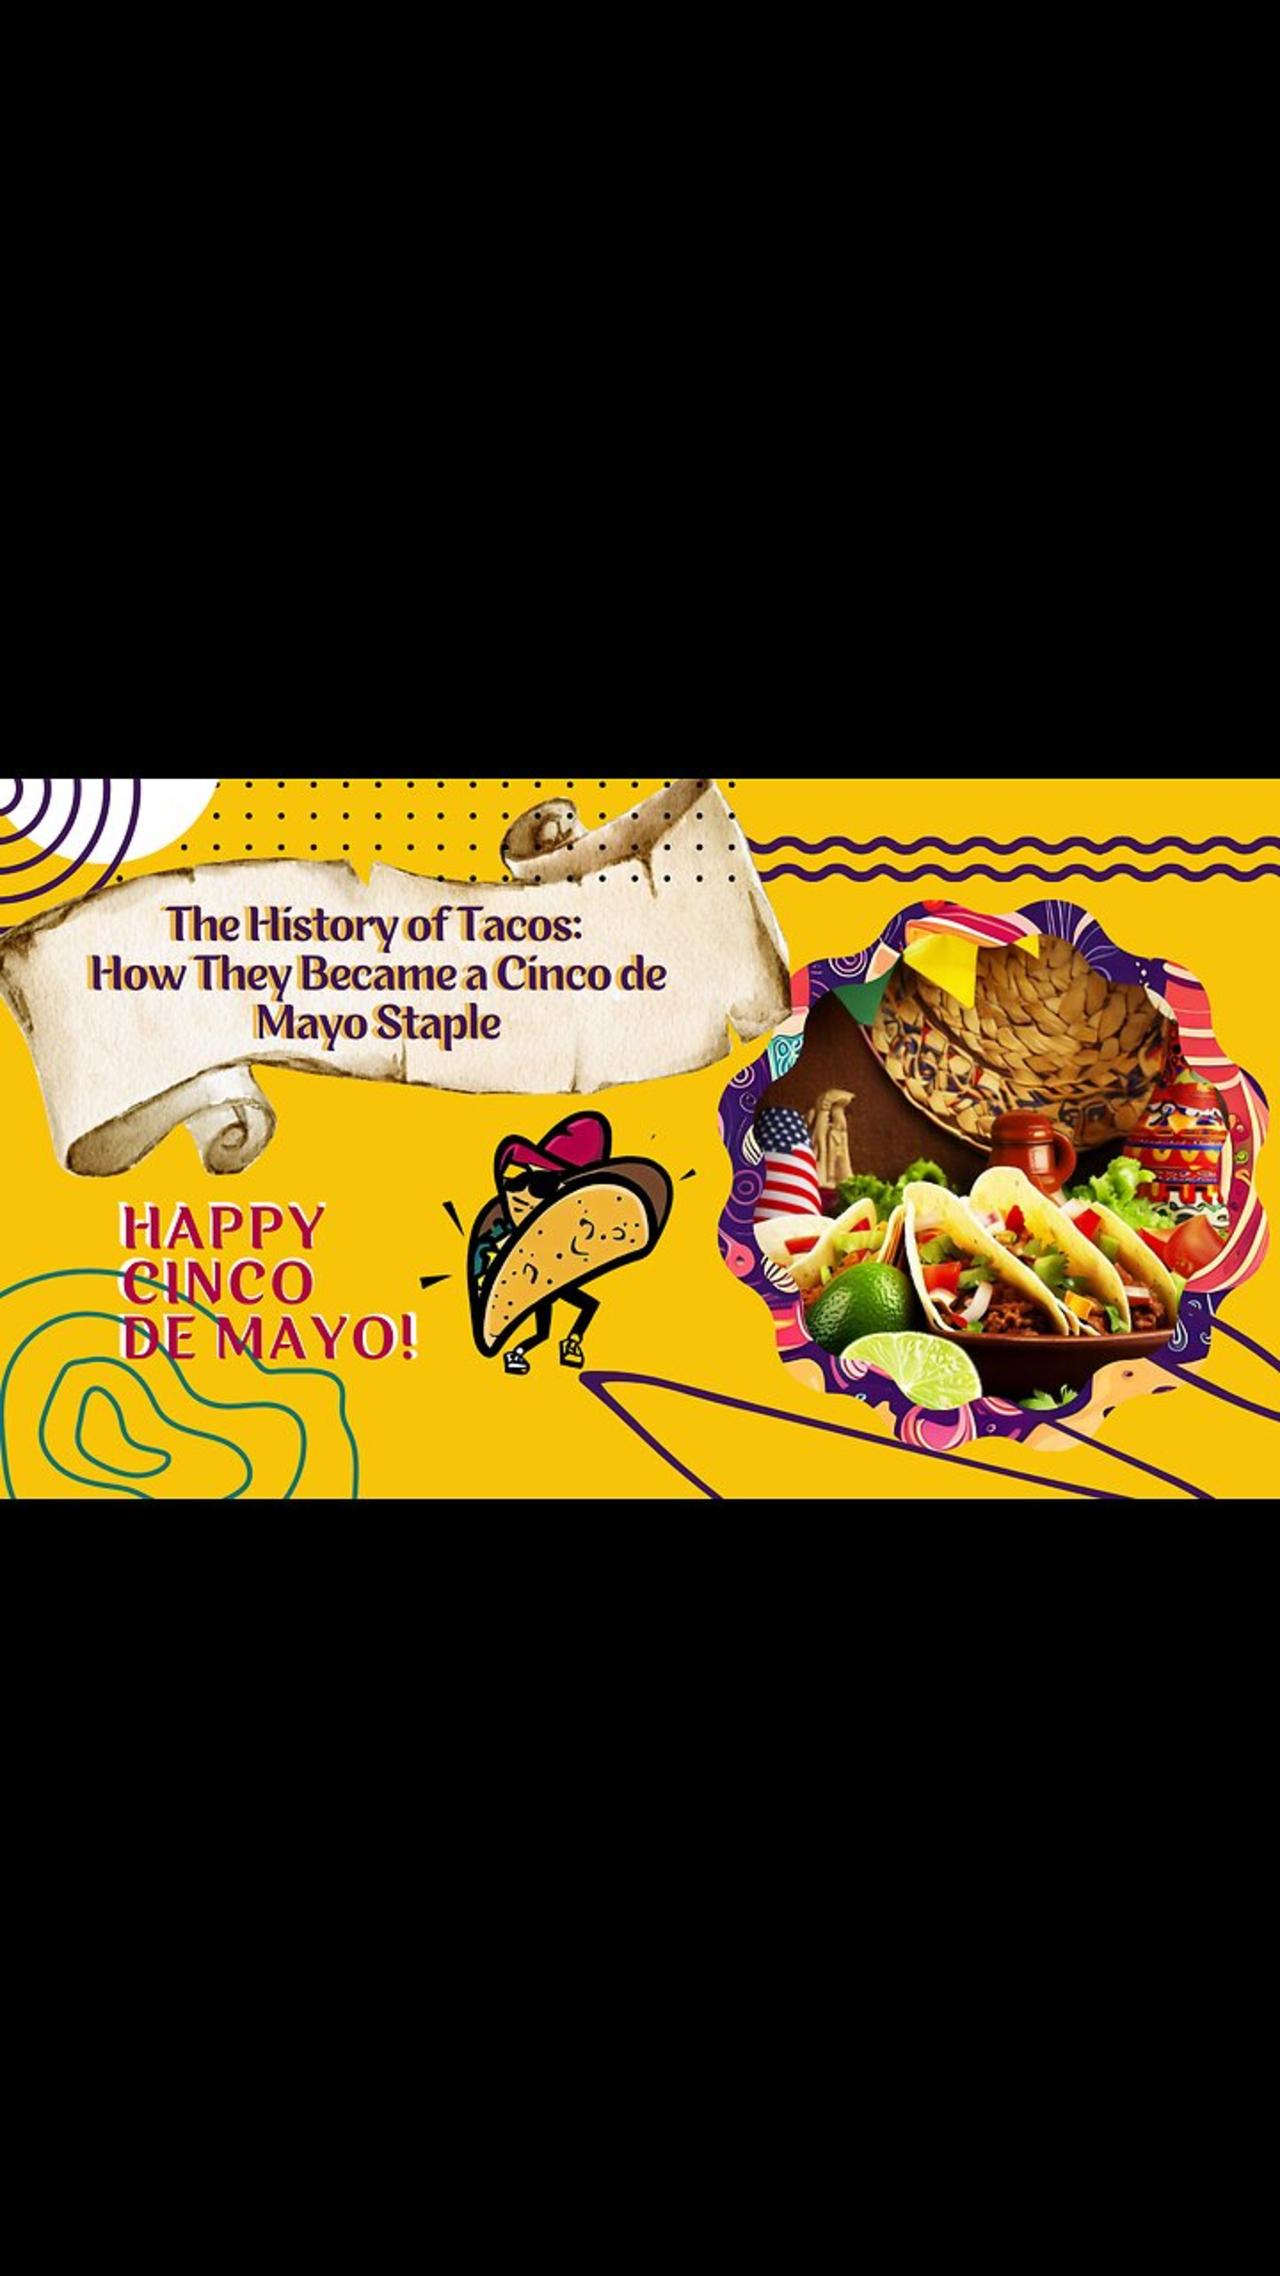 The History of Tacos: How They Became a Cinco de Mayo Staple 🌮